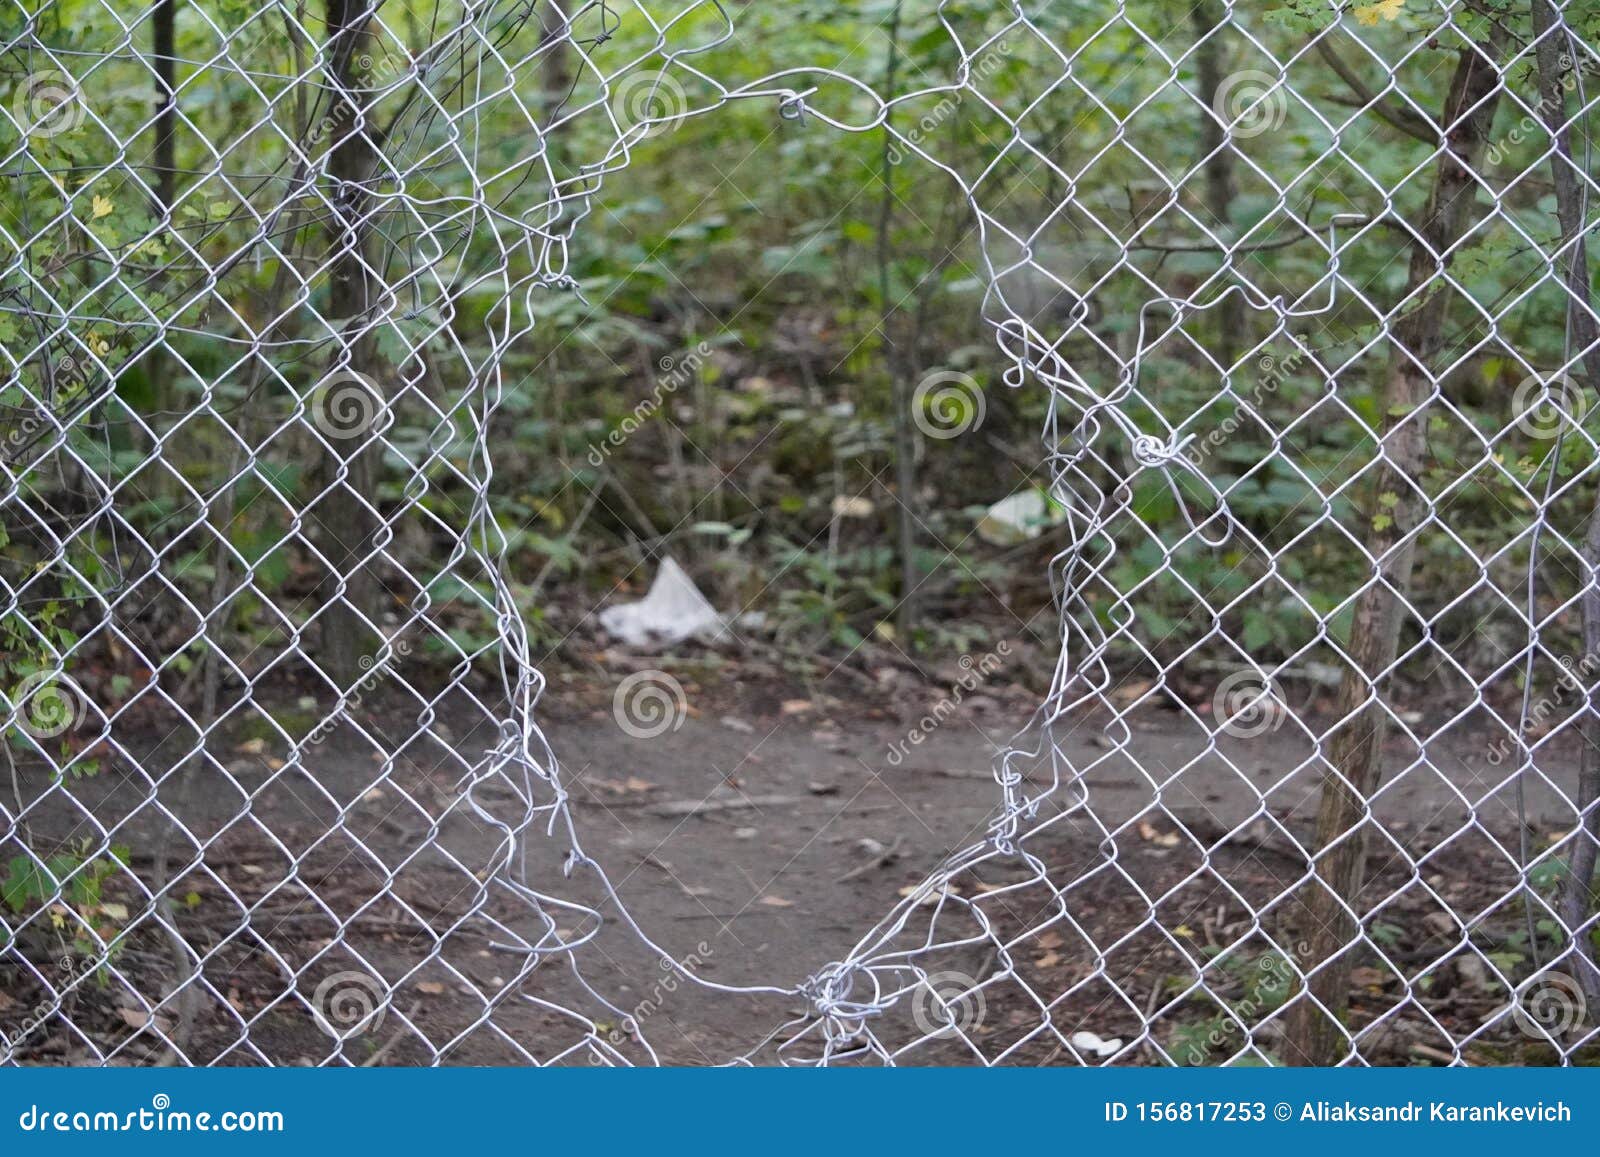 The Hole In The Steel Fence Of The Mesh Netting, The Passage To The ...
